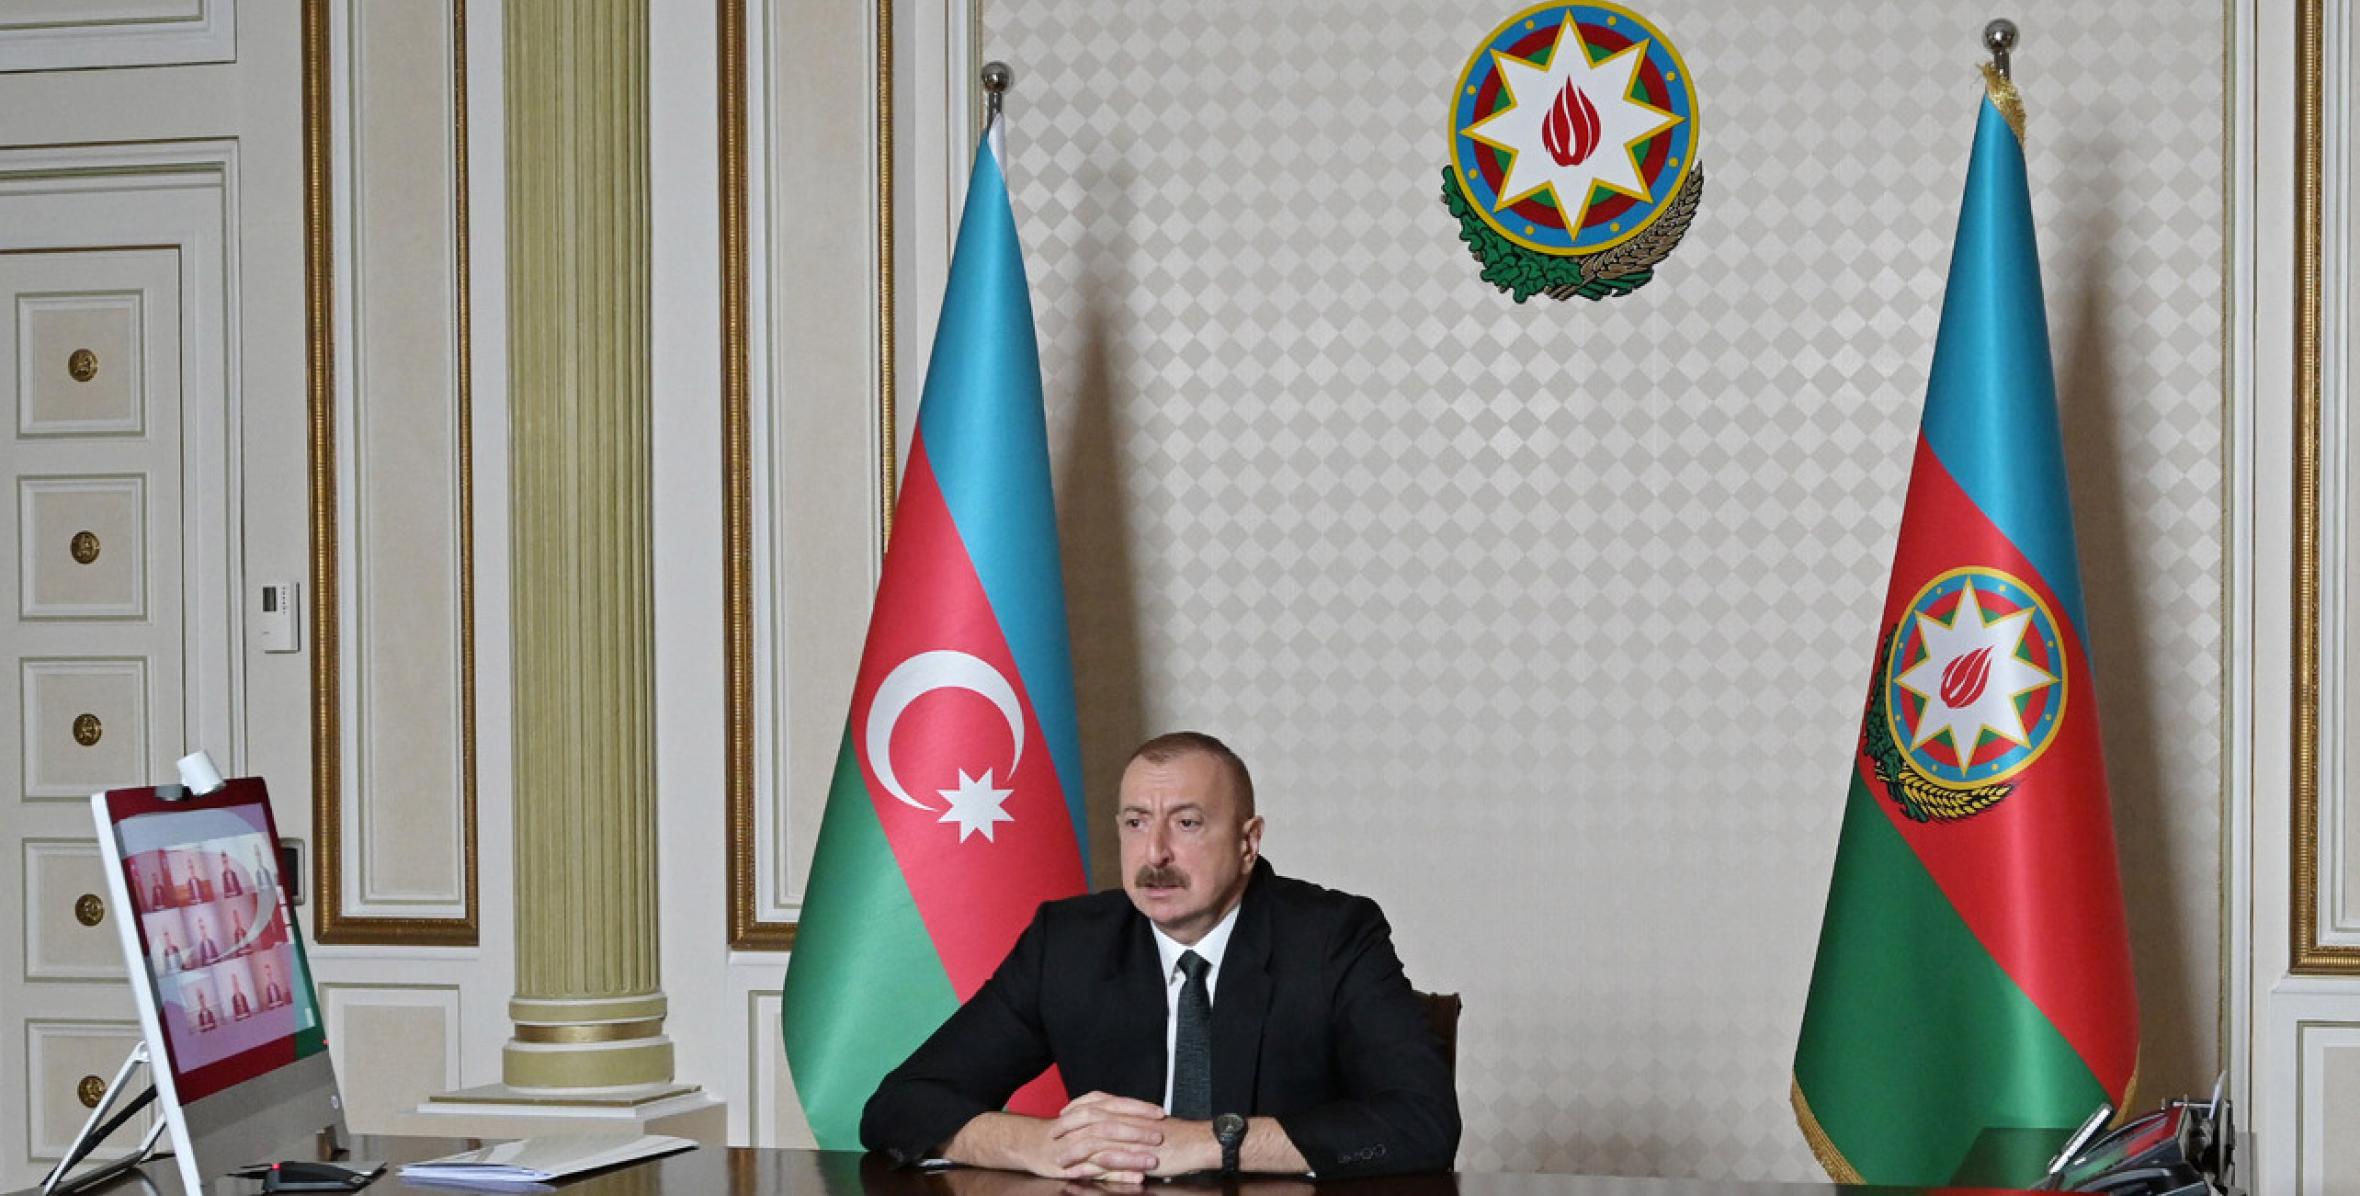 Closing speech by Ilham Aliyev at the Cabinet meeting on results of socio-economic development in first quarter of 2020 and future tasks